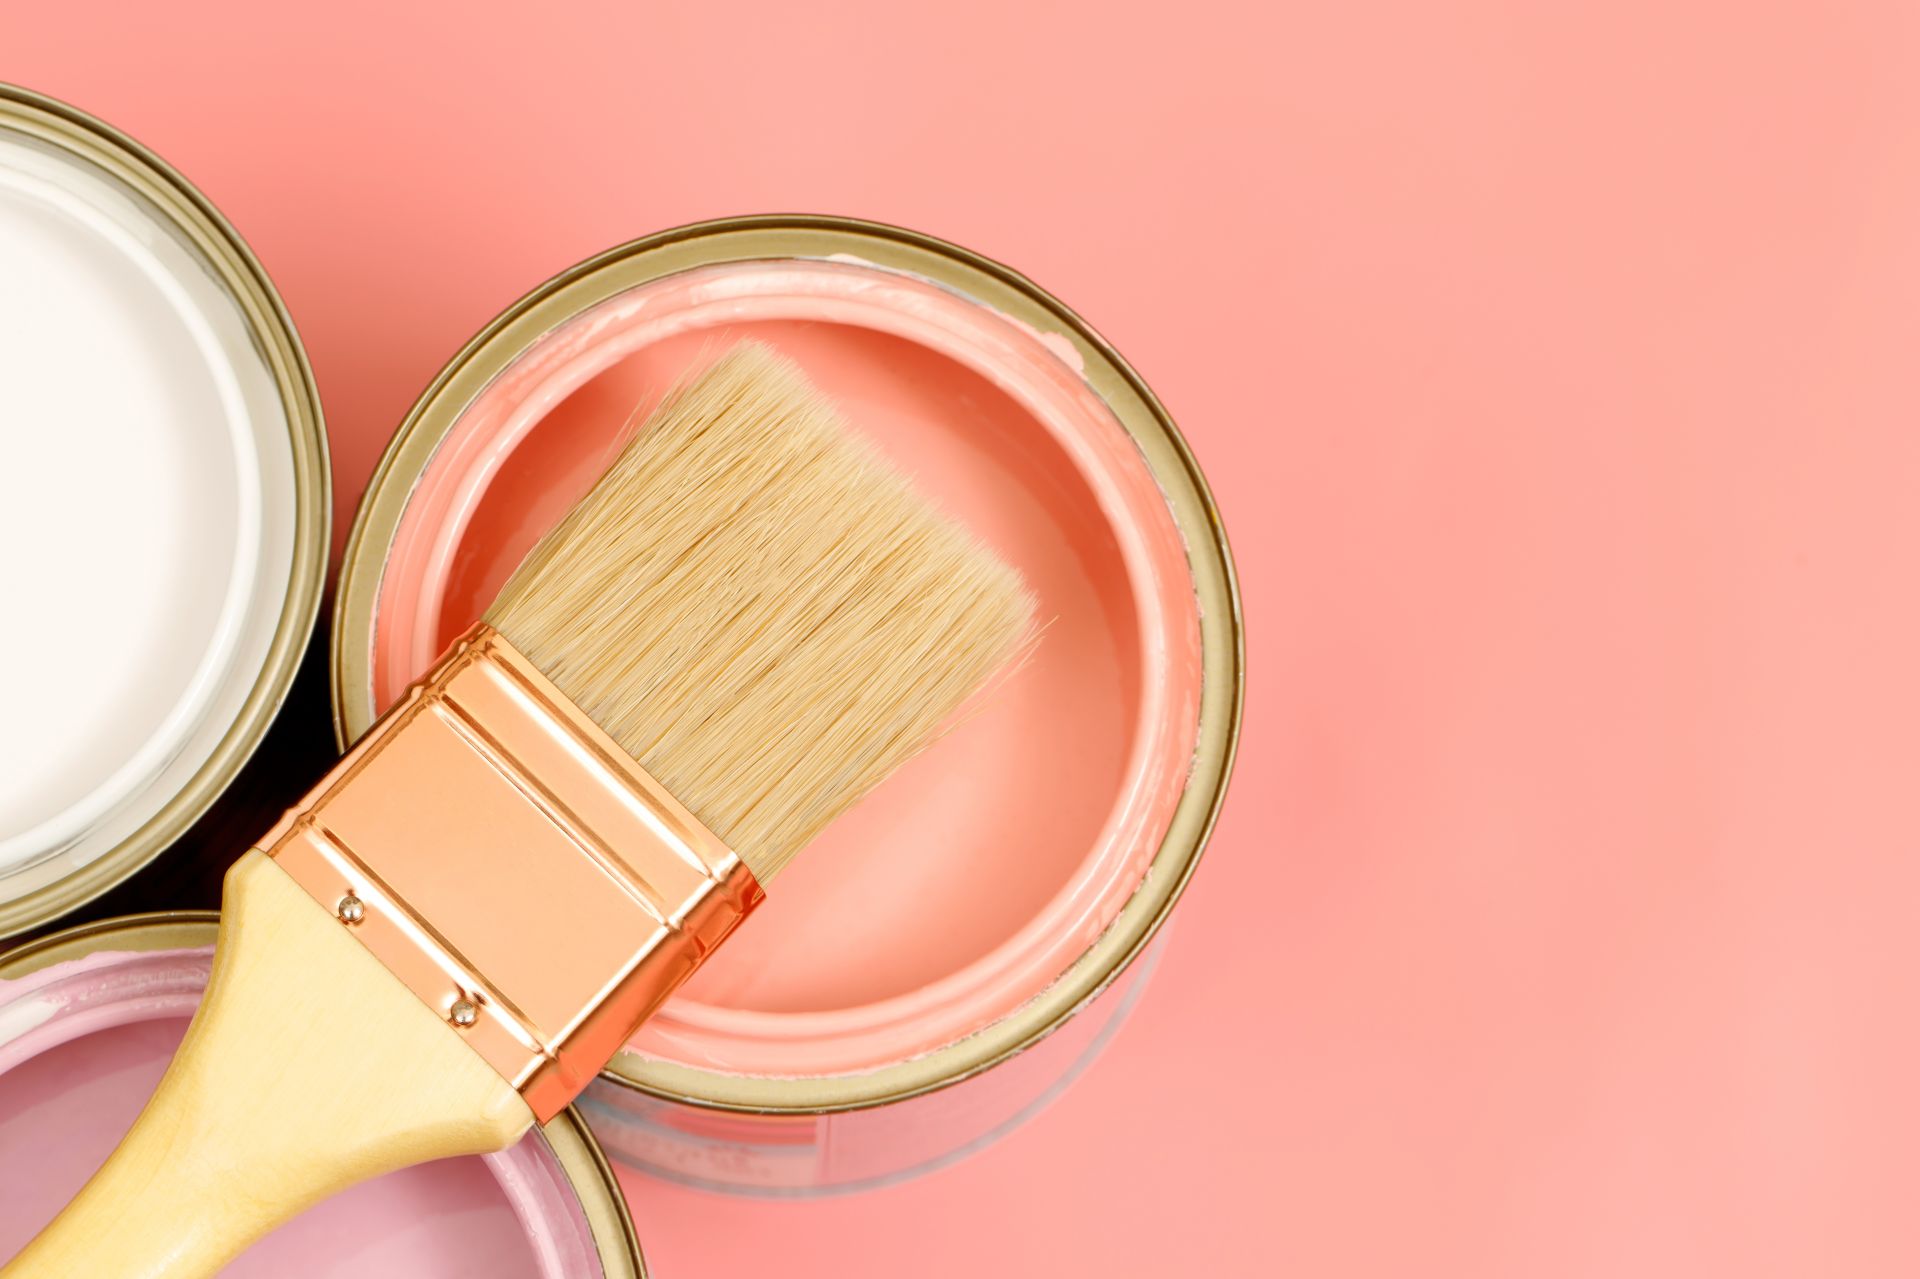 paint-cans-paint-brushes-how-choose-perfect-interior-paint-color-good-health (1)